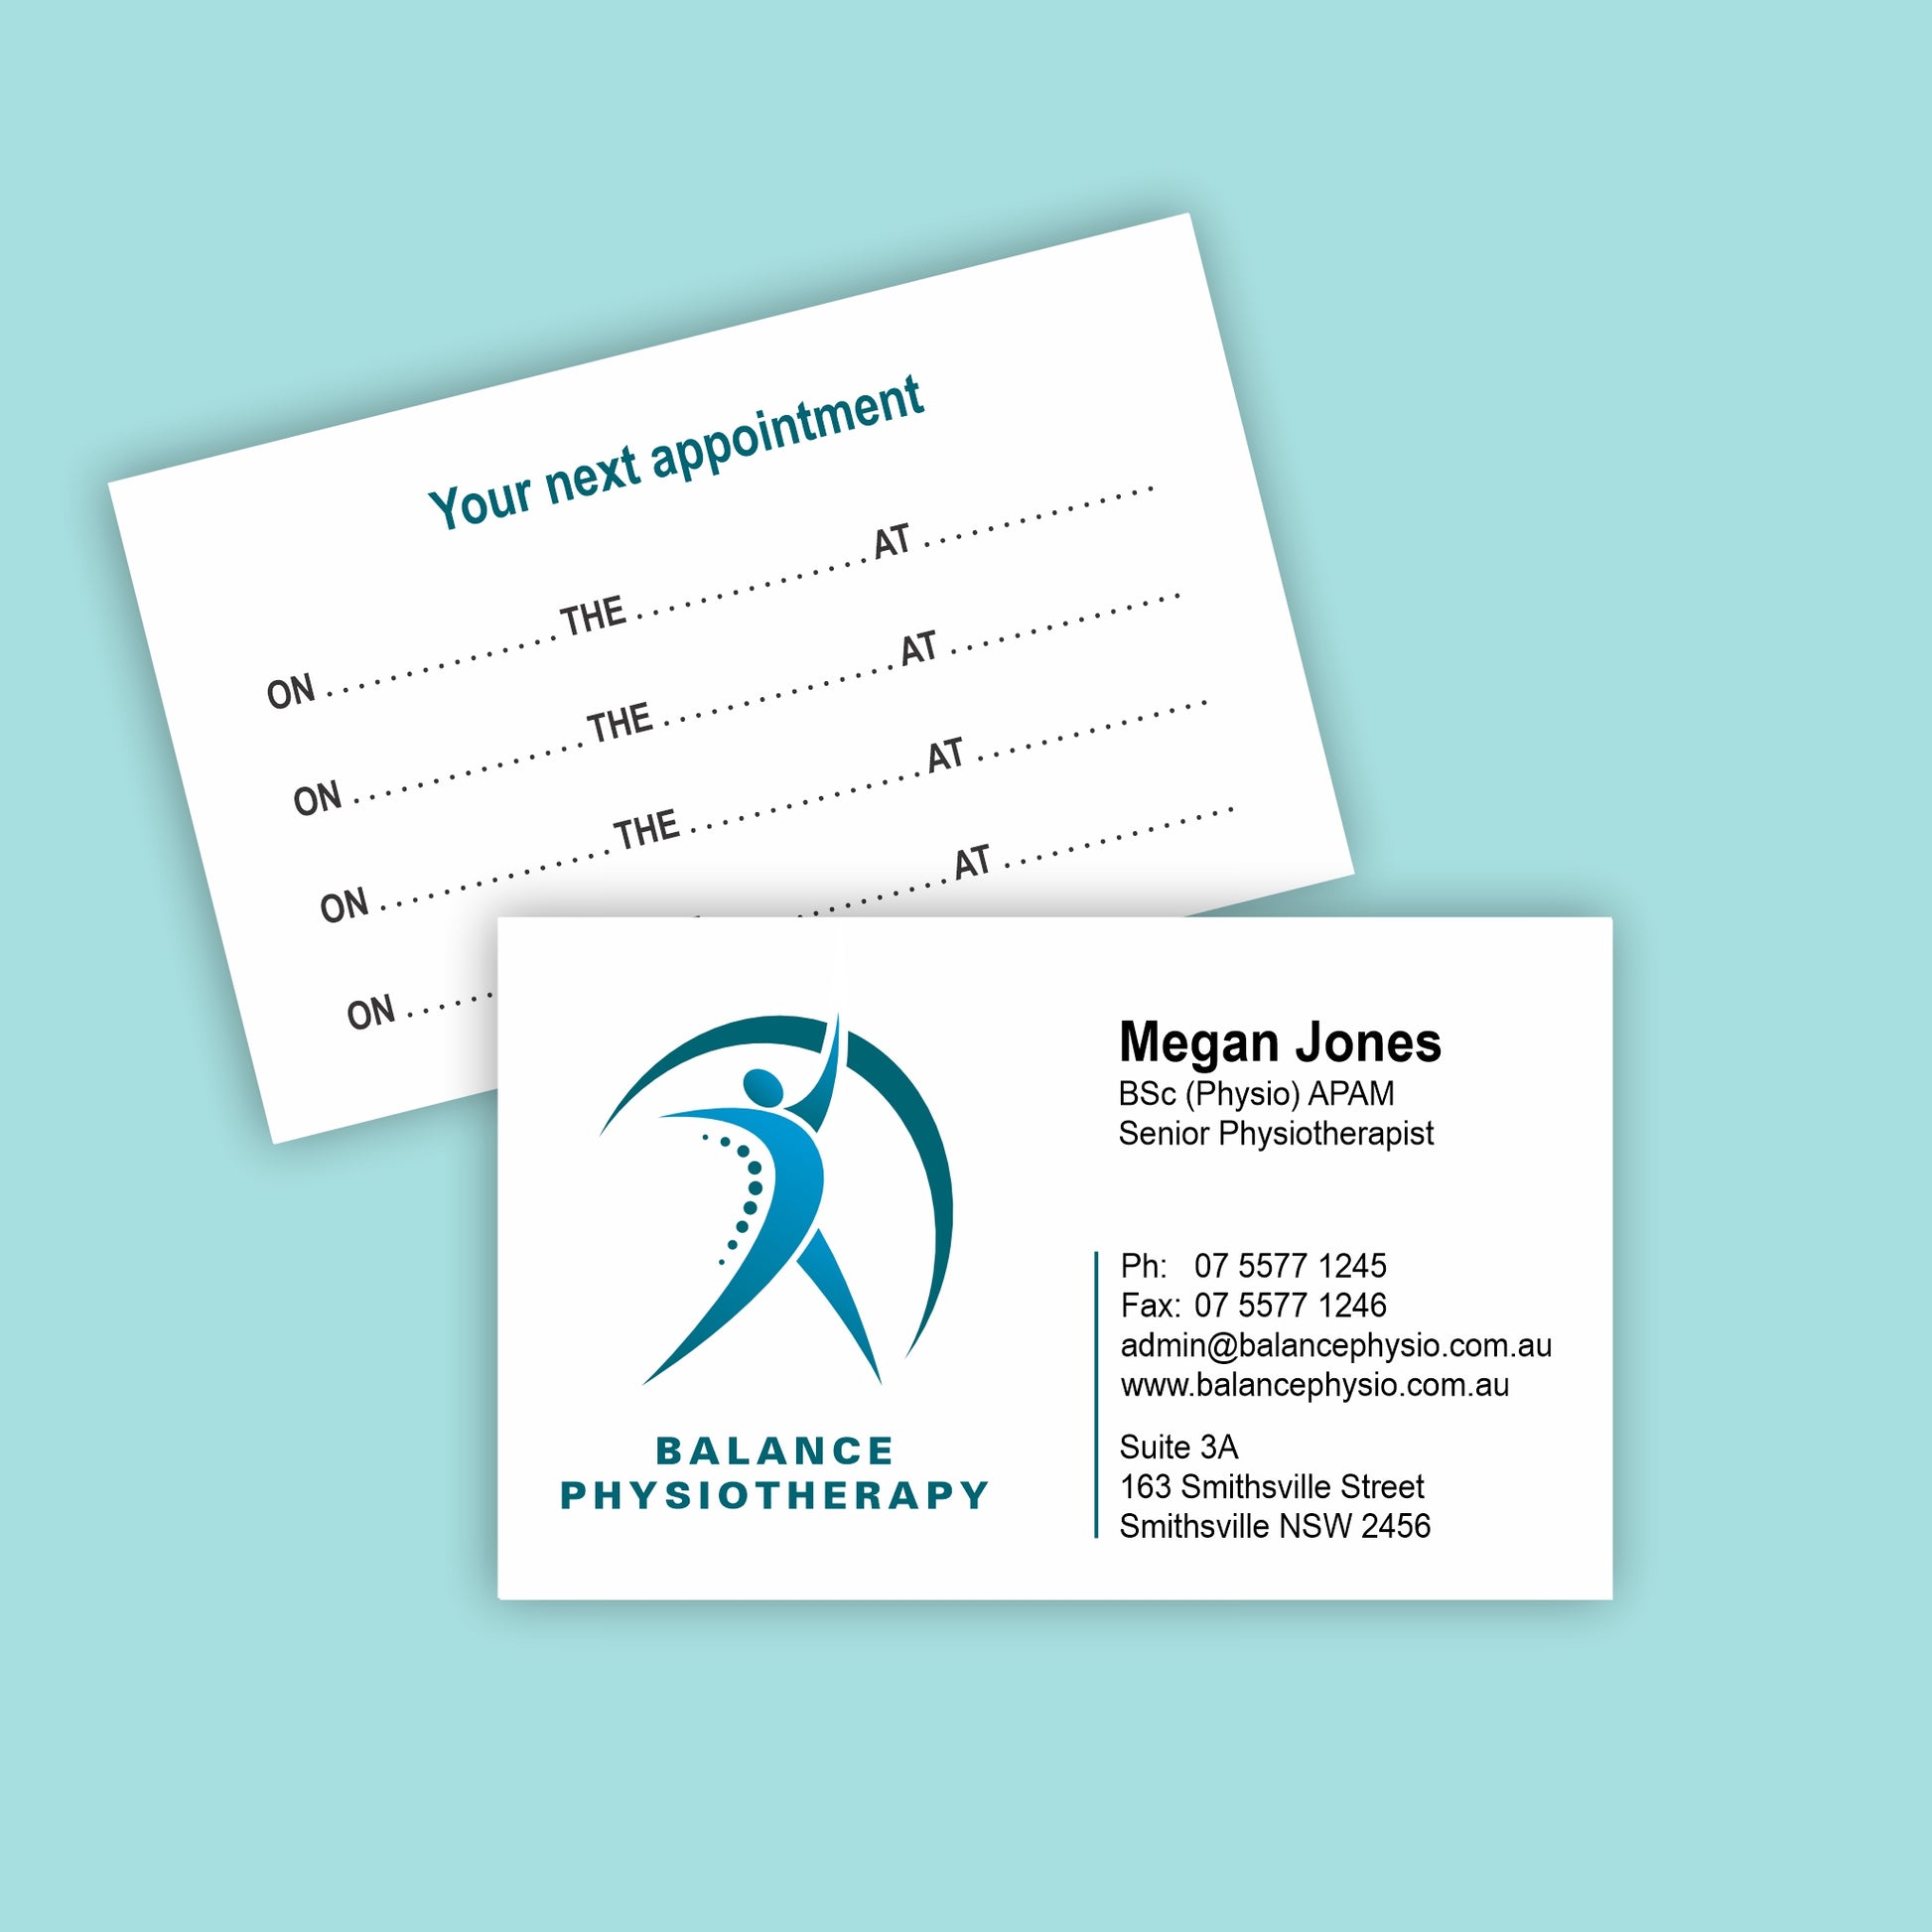 A photograph of a physiotherapist's appointment business cards printed both sides with room to write appointments on the back